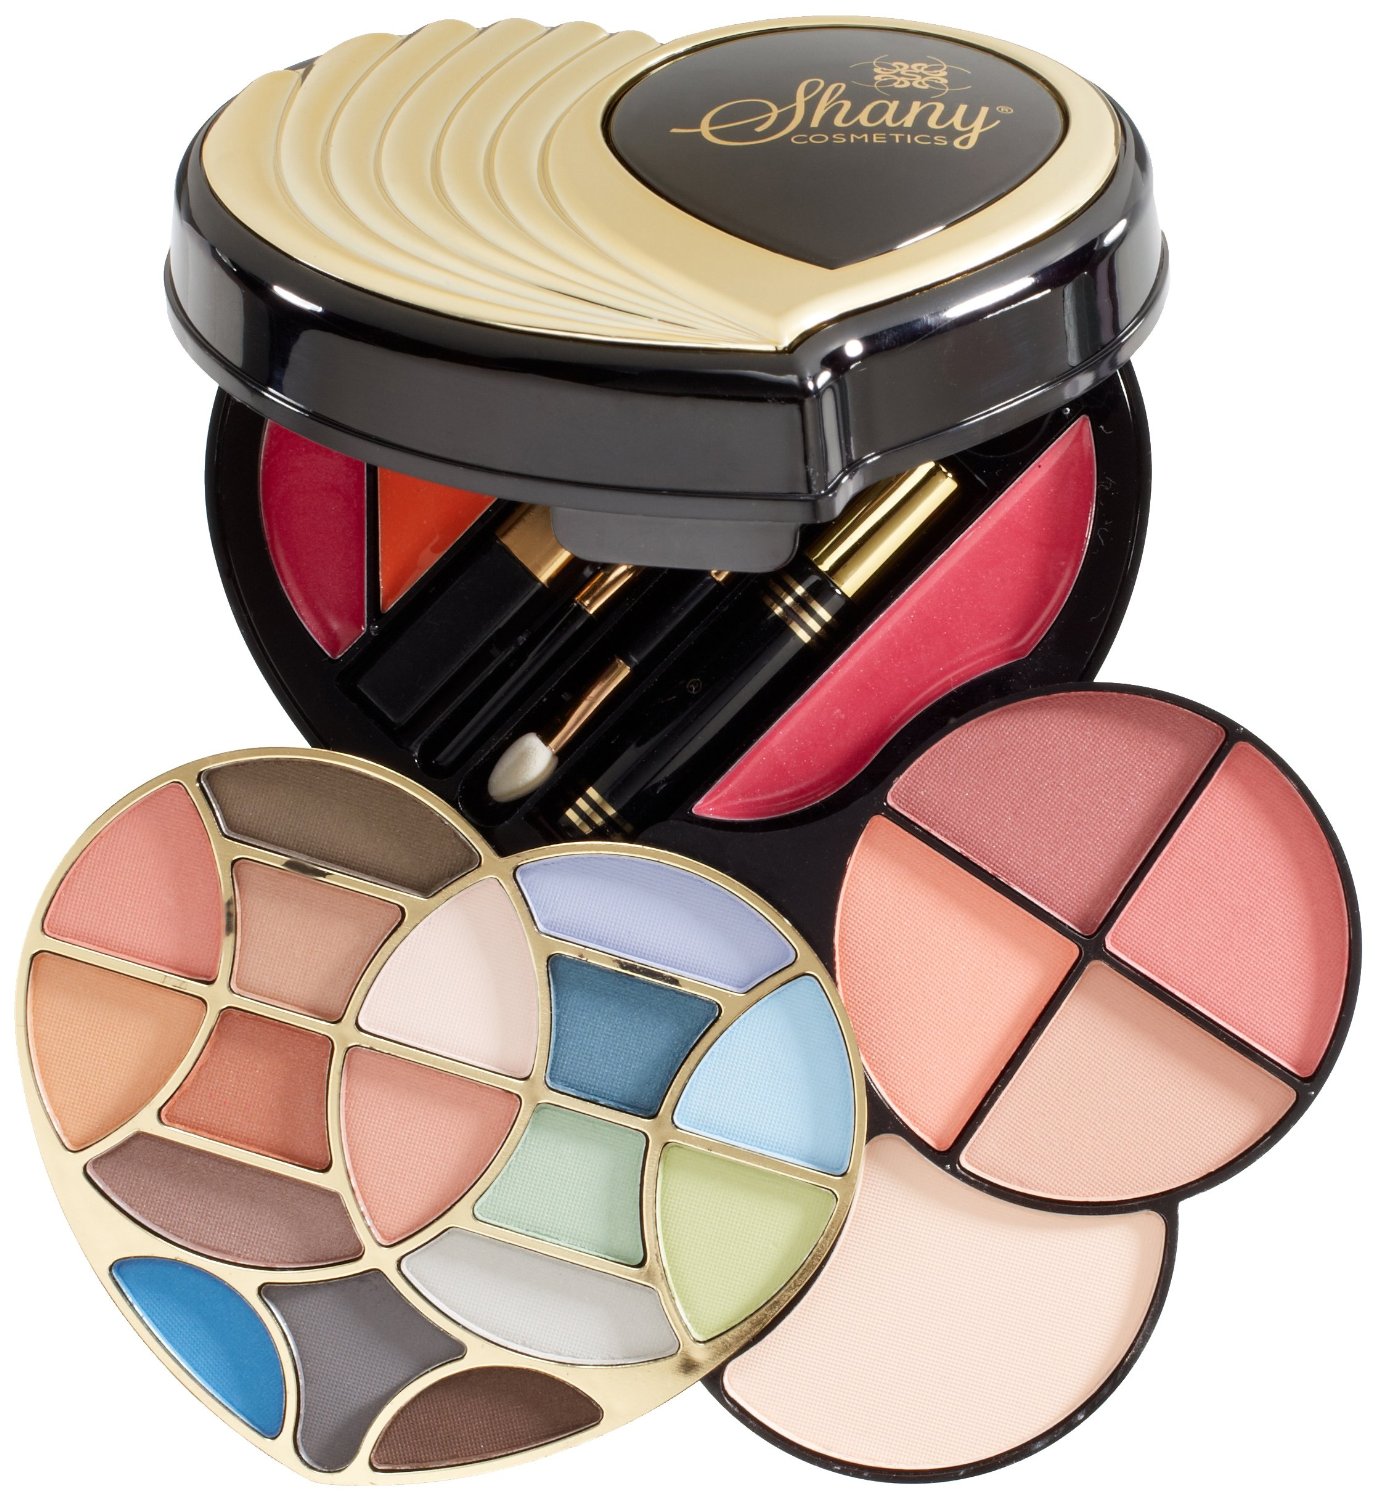 SHANY Cosmetics All In One Heart Makeup Set Only $15.95 – 60% Savings